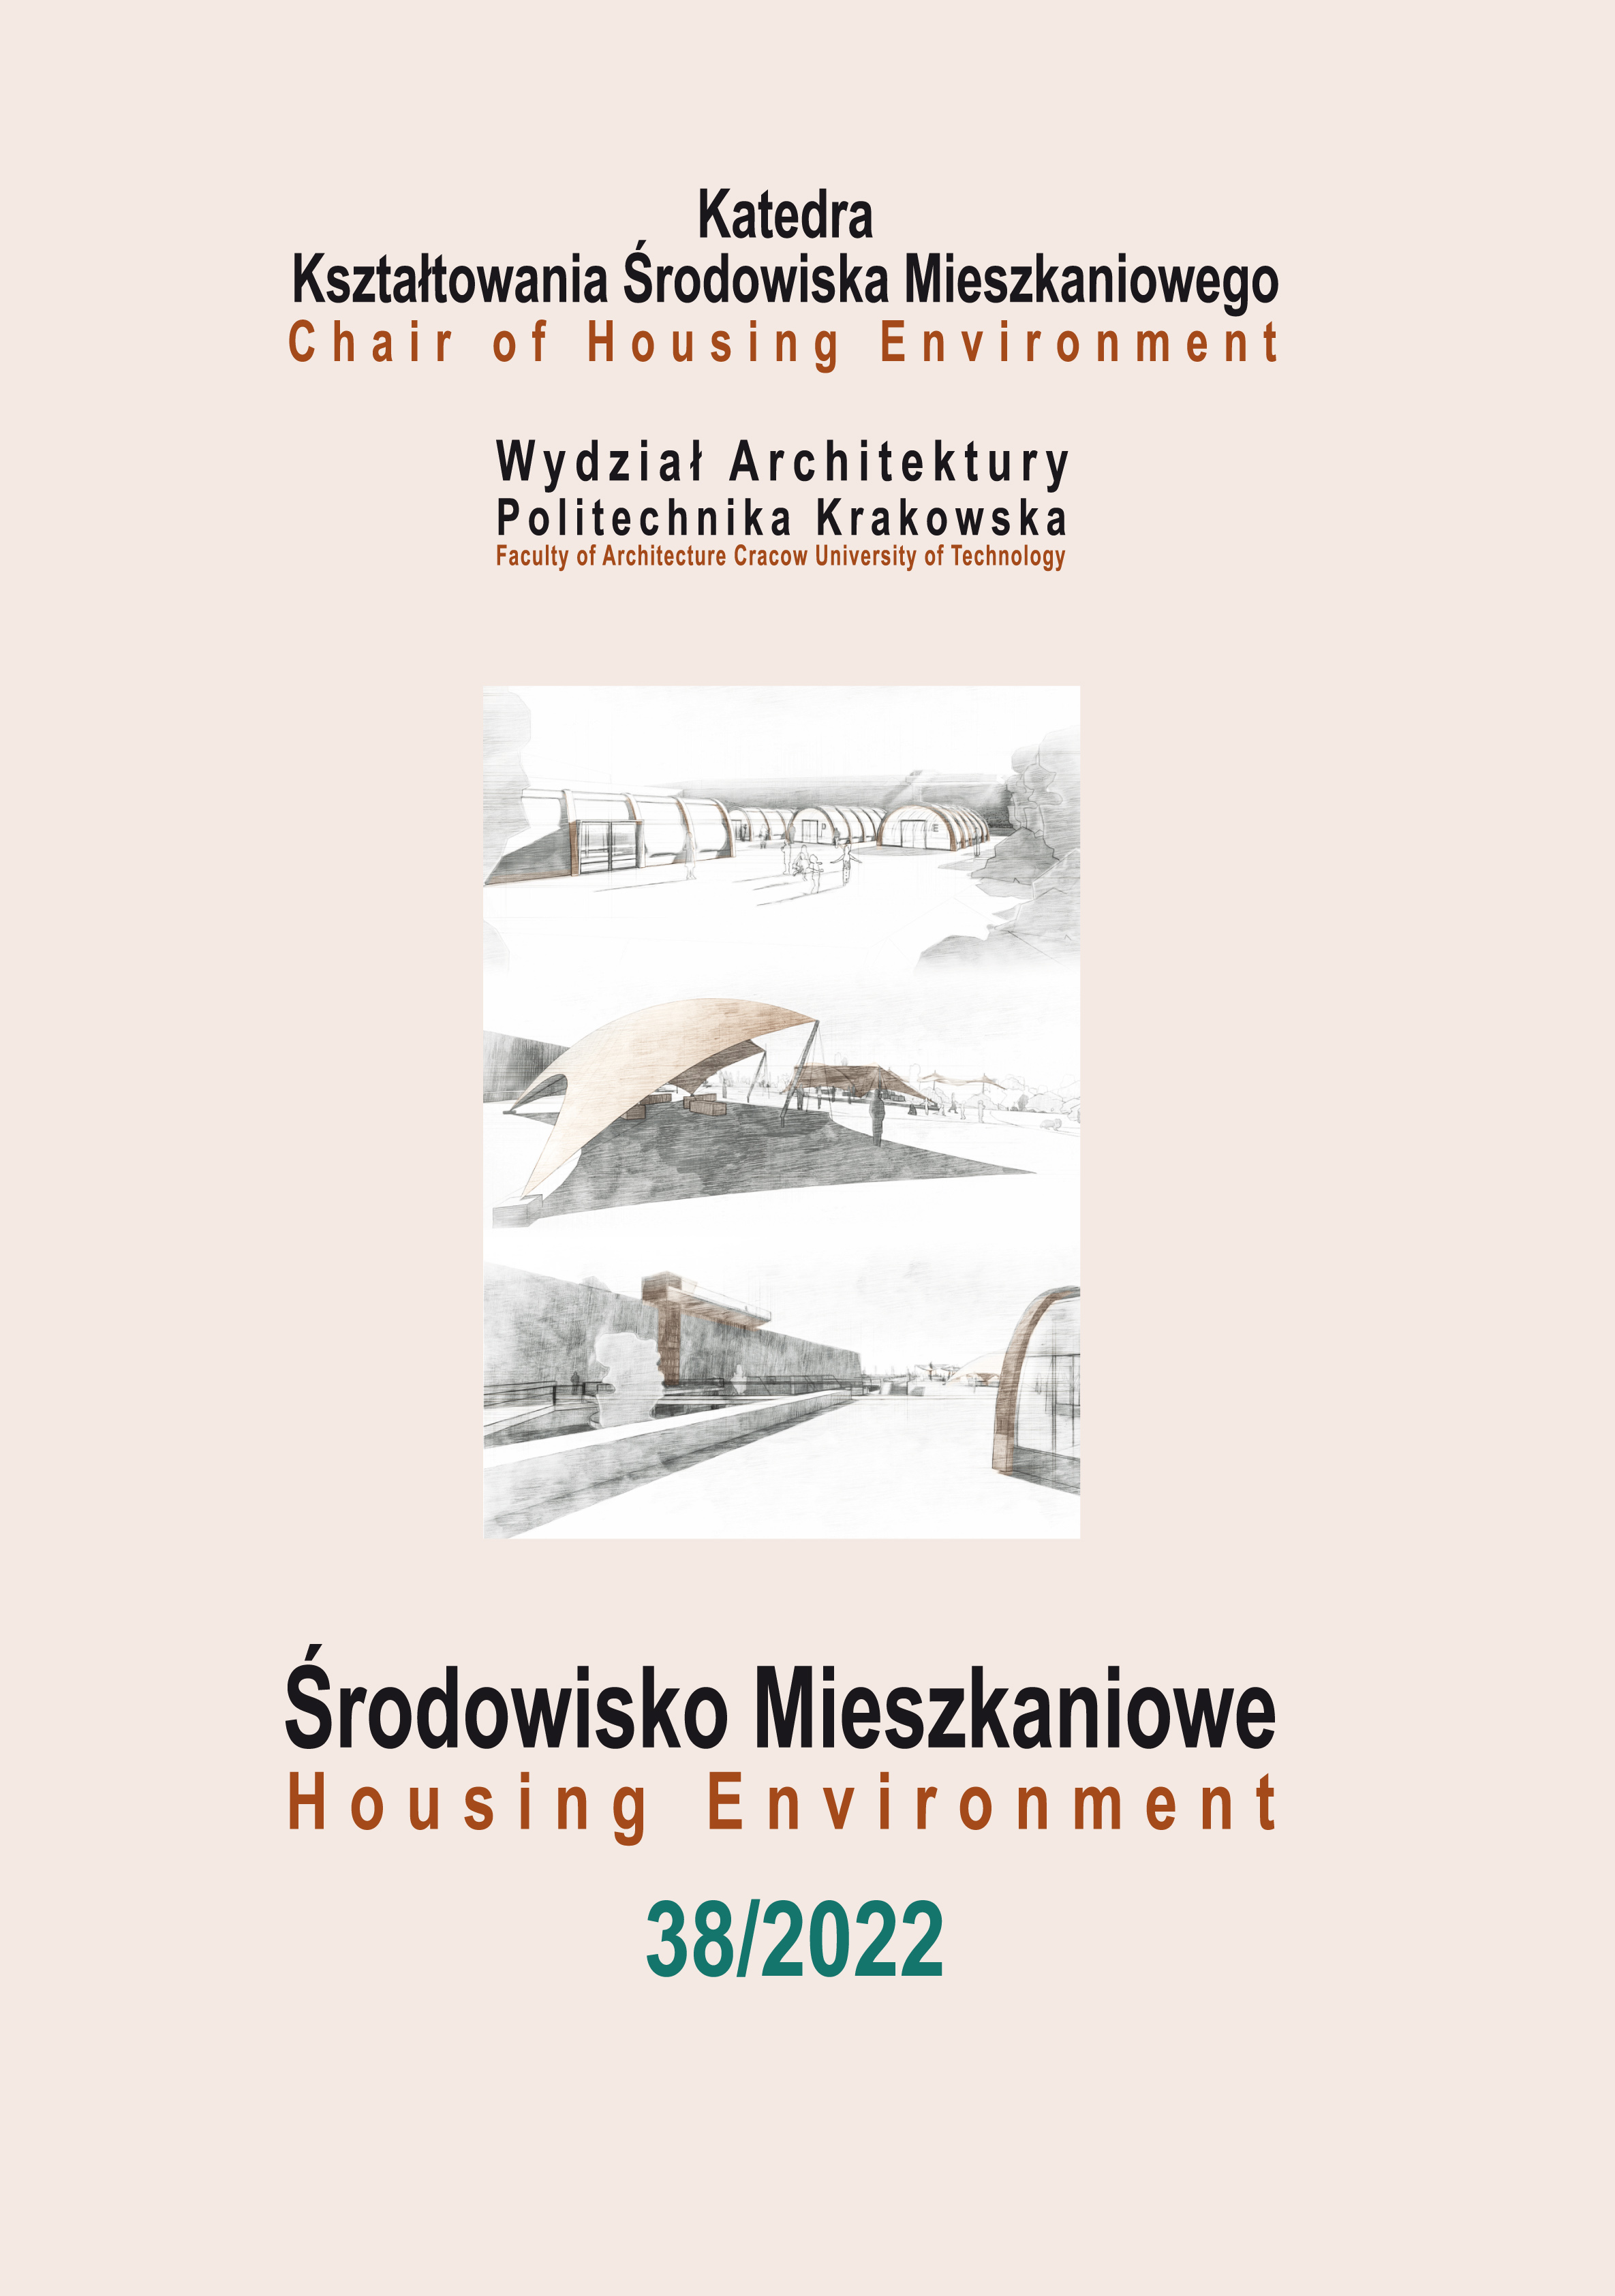 The Open Building in the context of the housing crisis in Poland